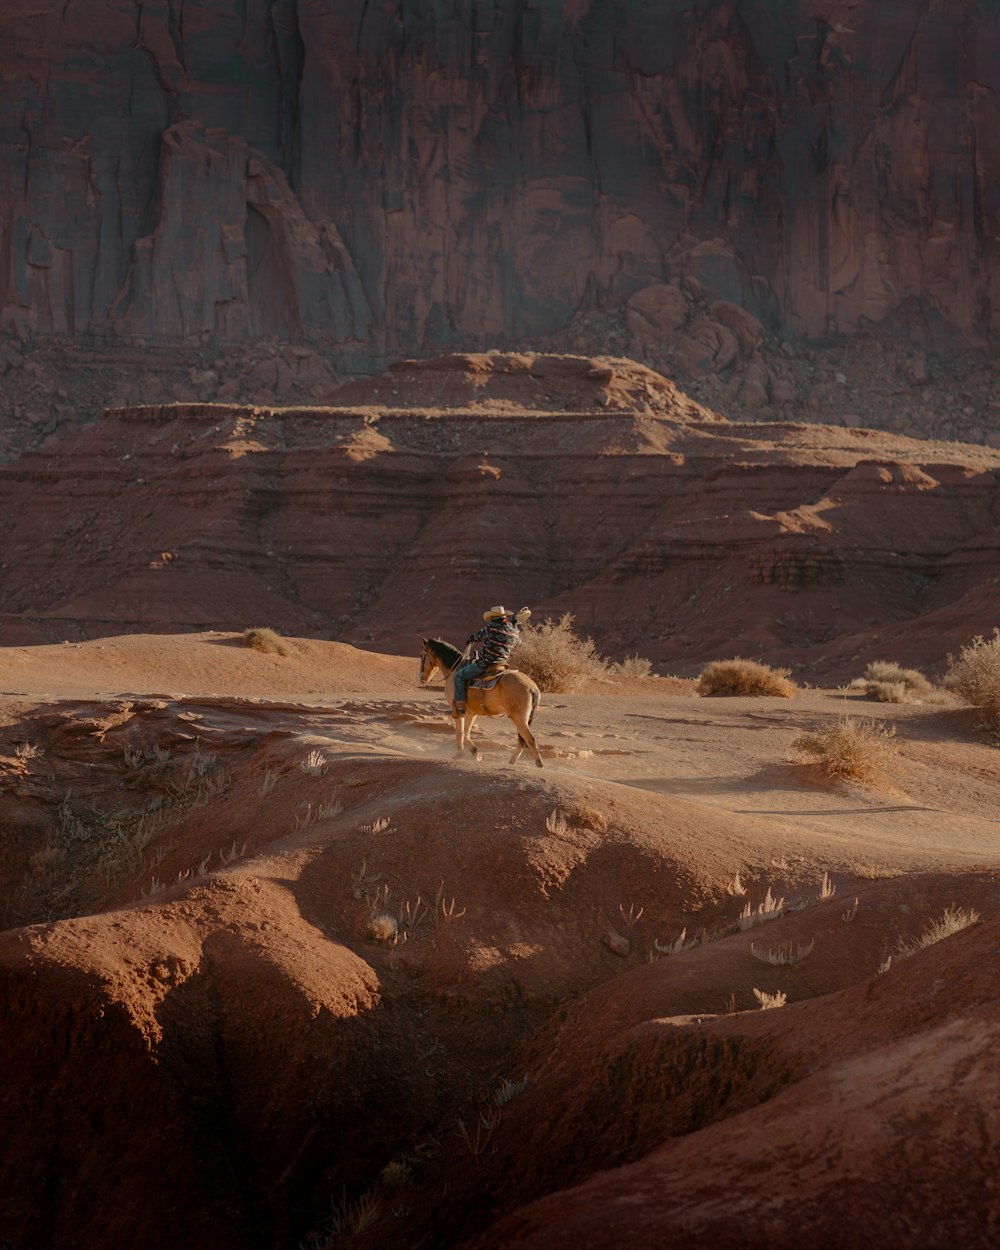 a person riding a horse in the desert